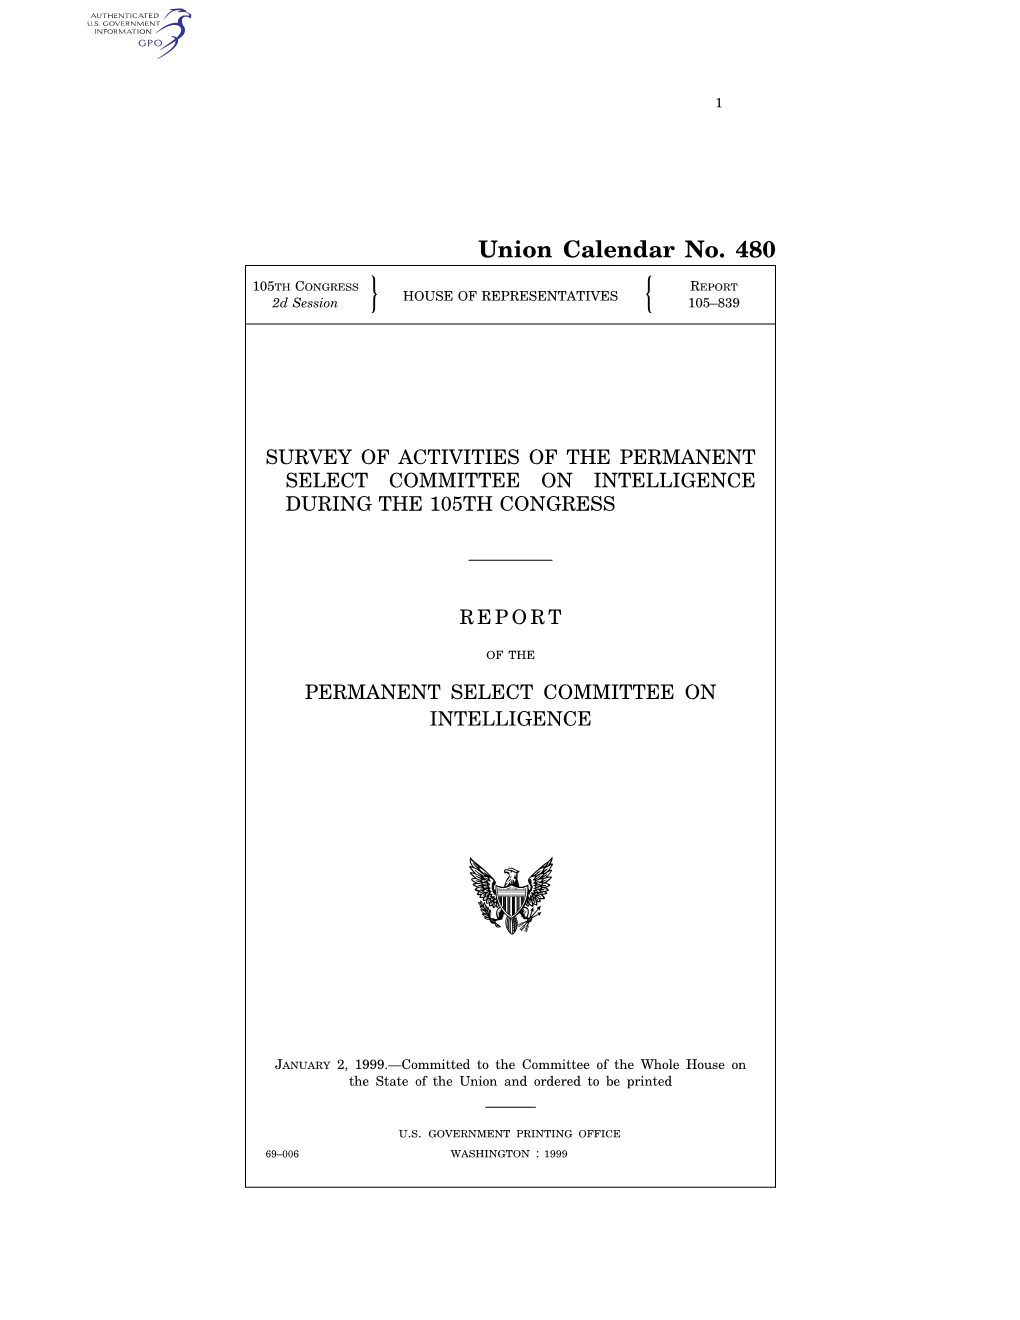 Survey of Activities of the Permanent Select Committee on Intelligence During the 105Th Congress